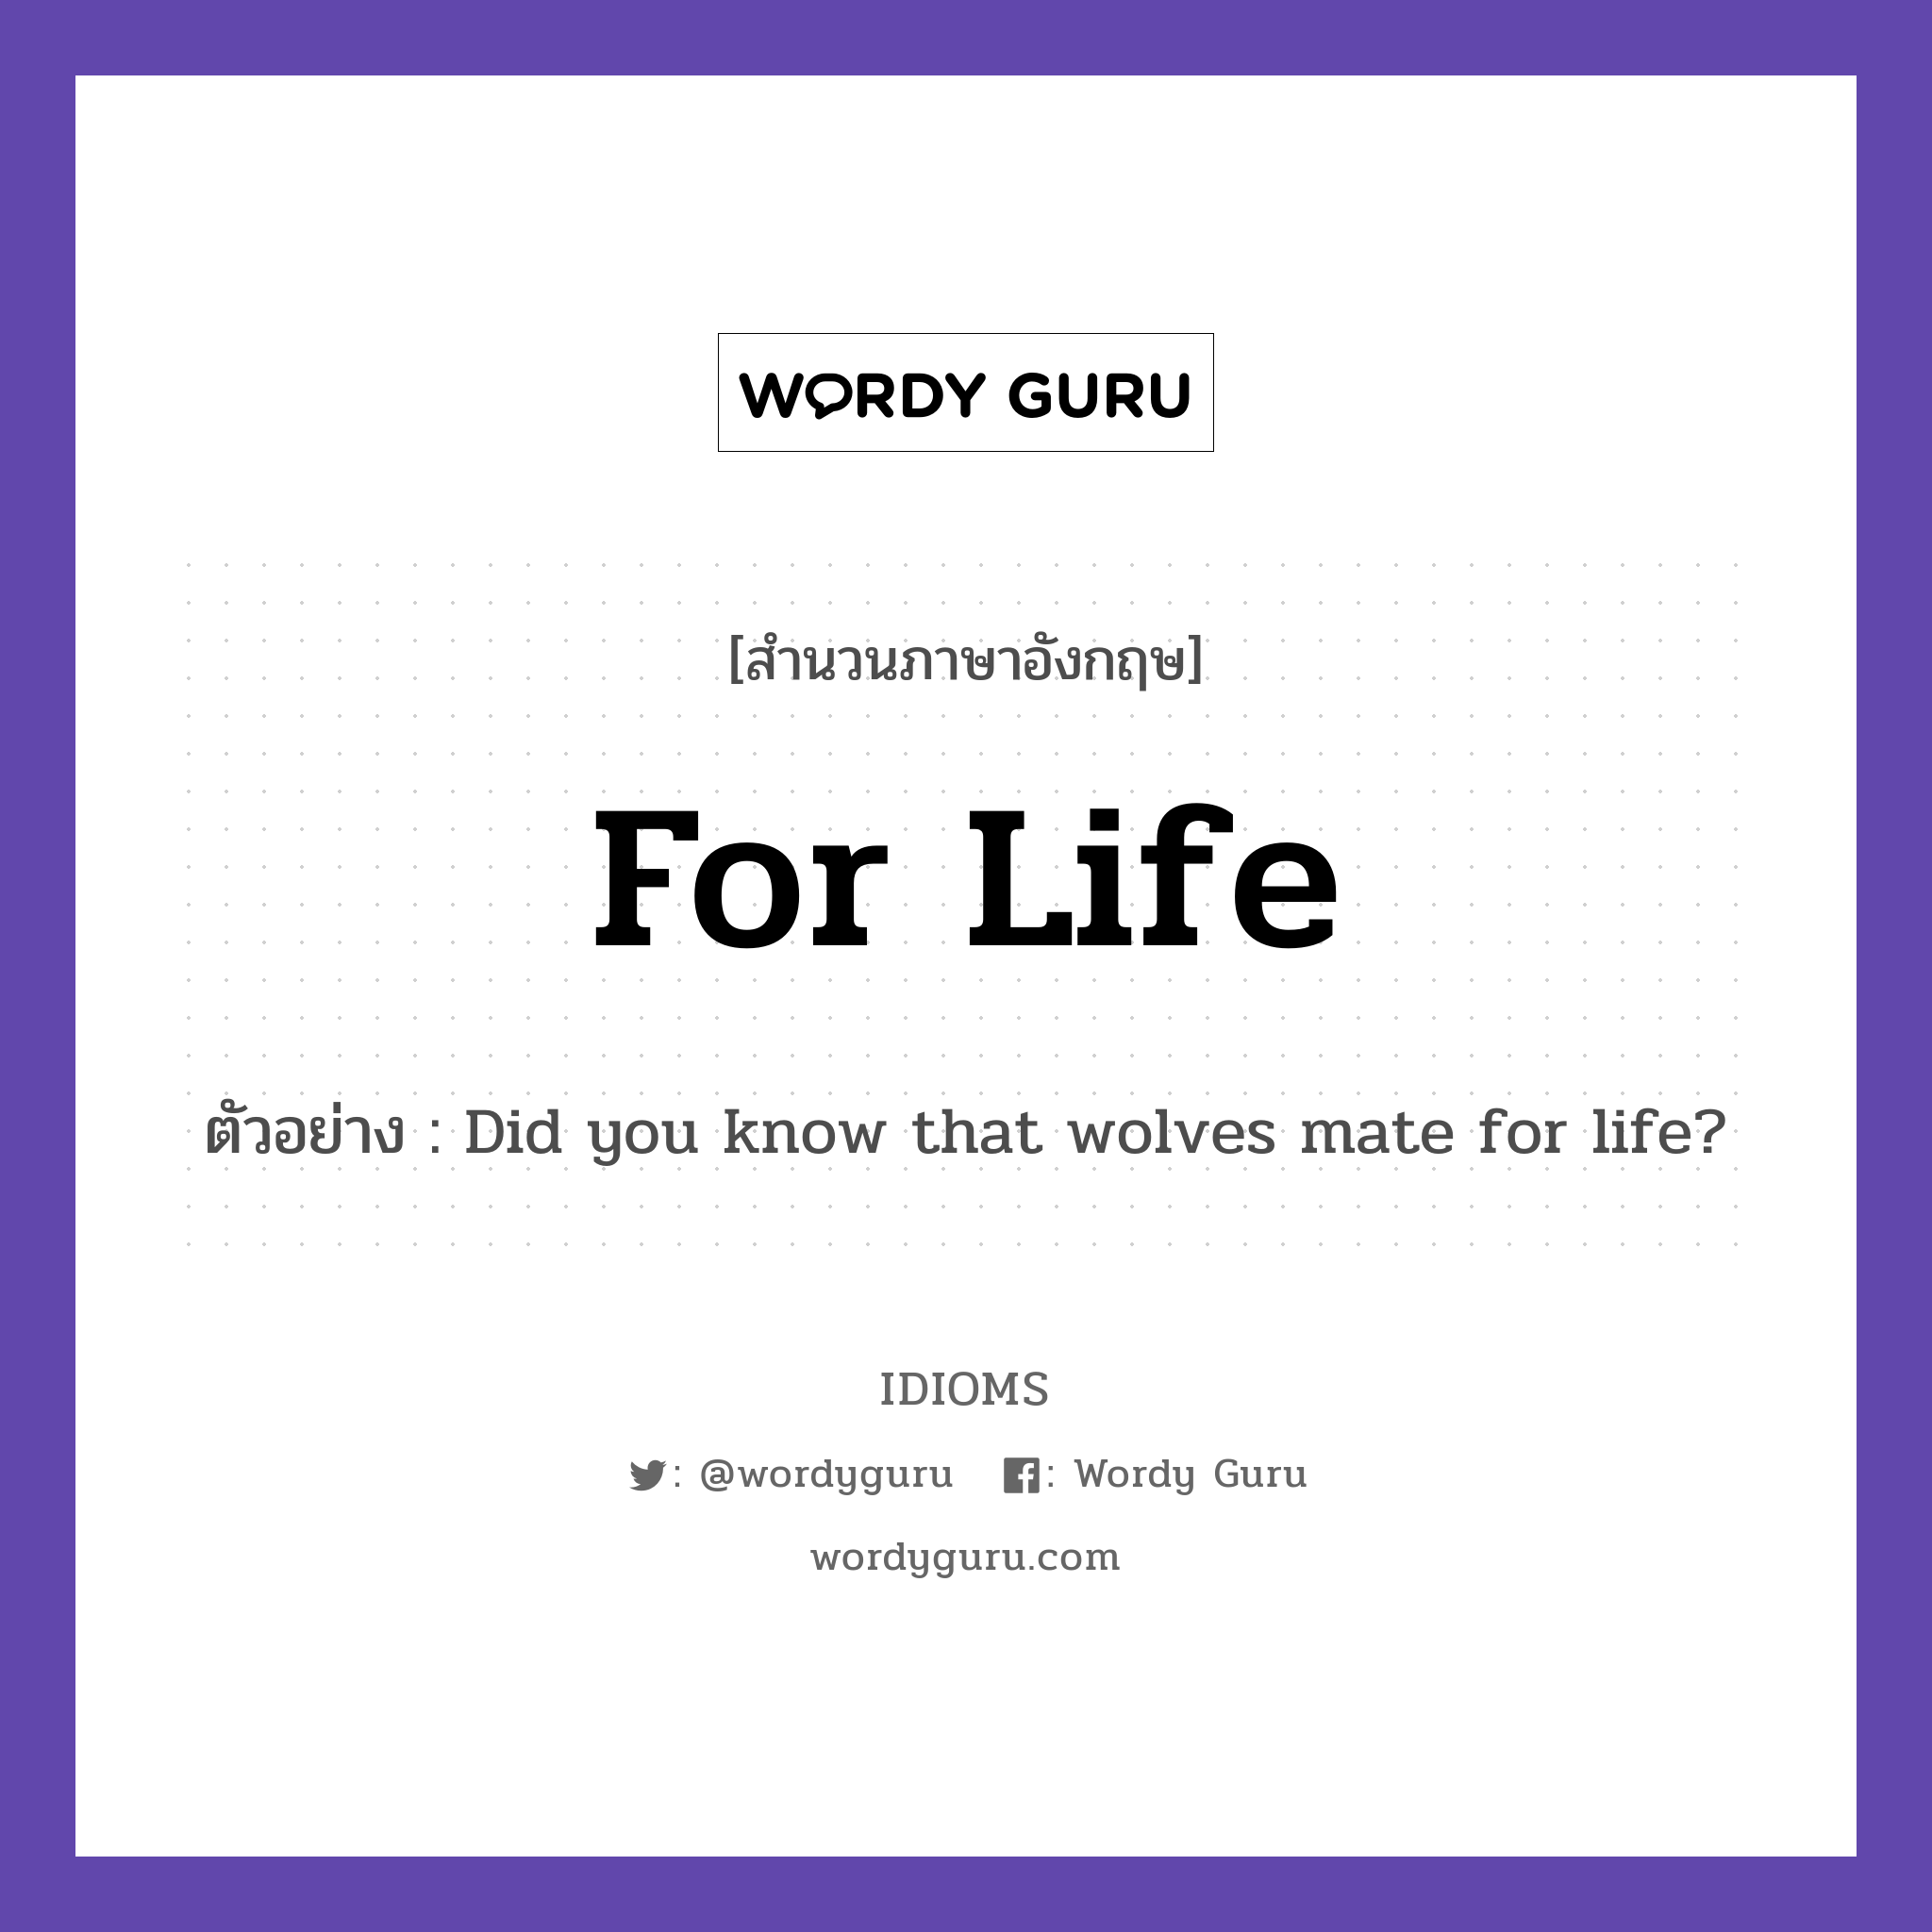 For Life แปลว่า?, สำนวนภาษาอังกฤษ For Life ตัวอย่าง Did you know that wolves mate for life?